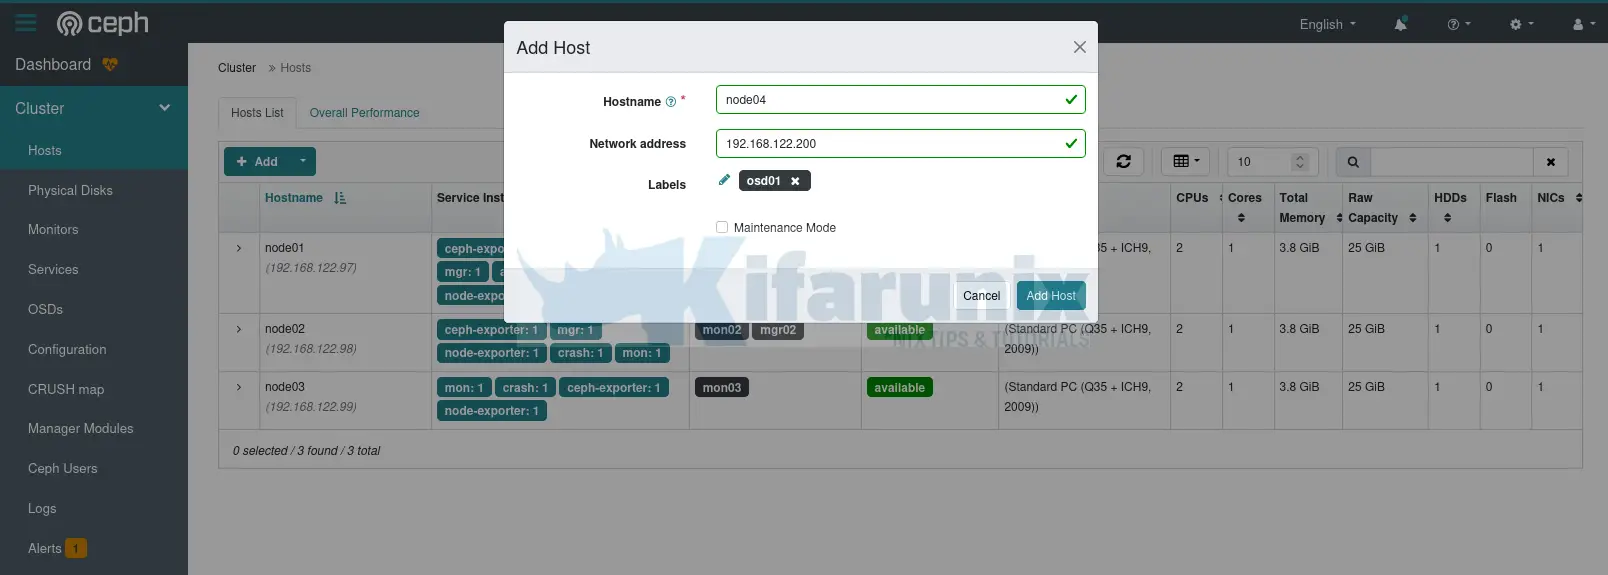 adding host to ceph cluster on dashboard